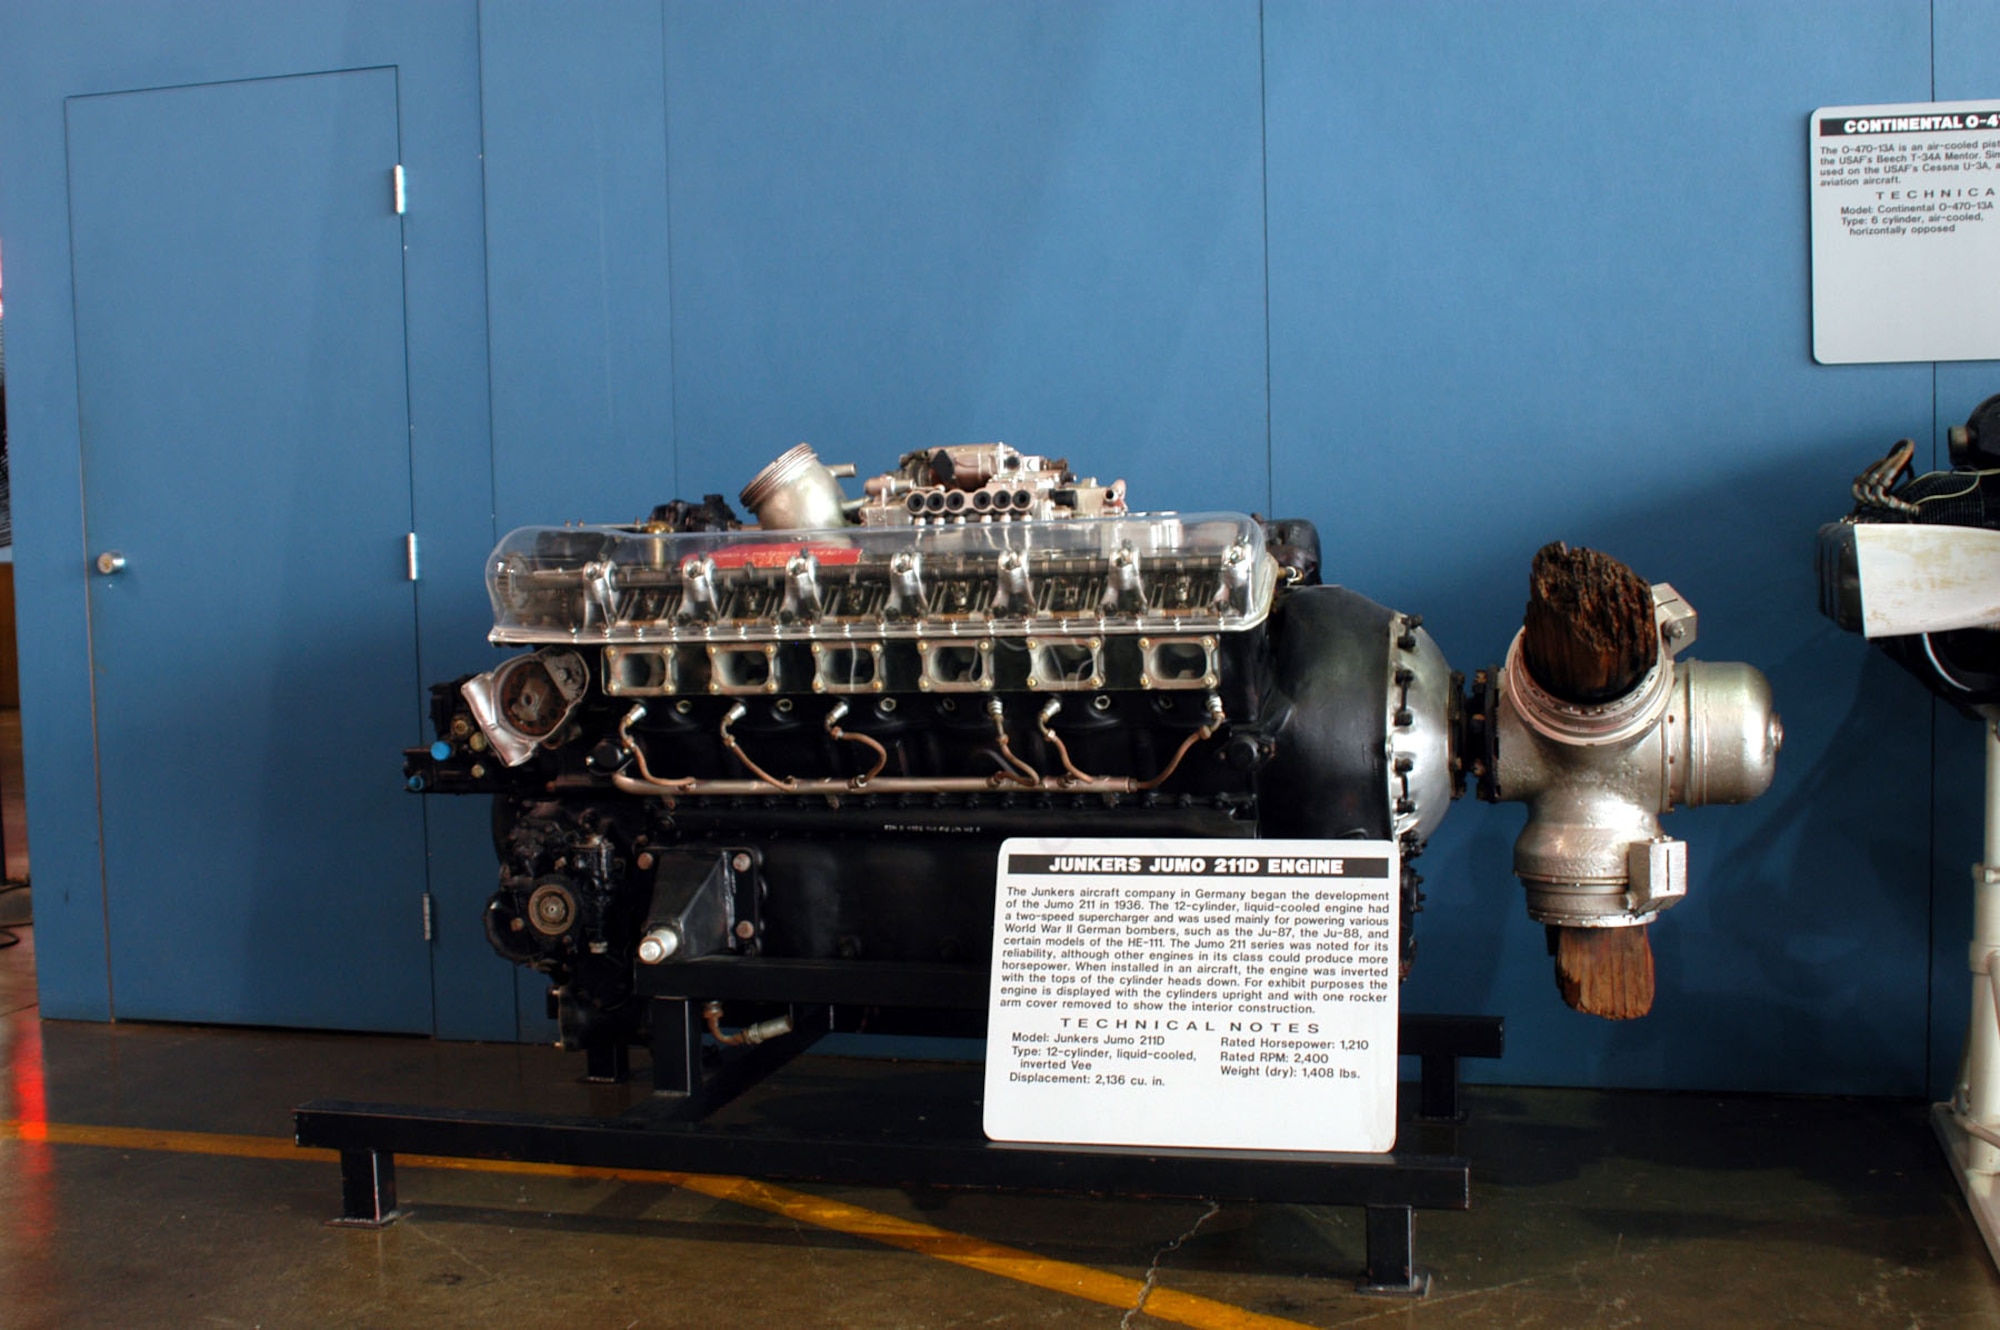 DAYTON, Ohio -- Junkers Jumo 211D engine on display in the Presidential Gallery at the National Museum of the United States Air Force. (U.S. Air Force photo)